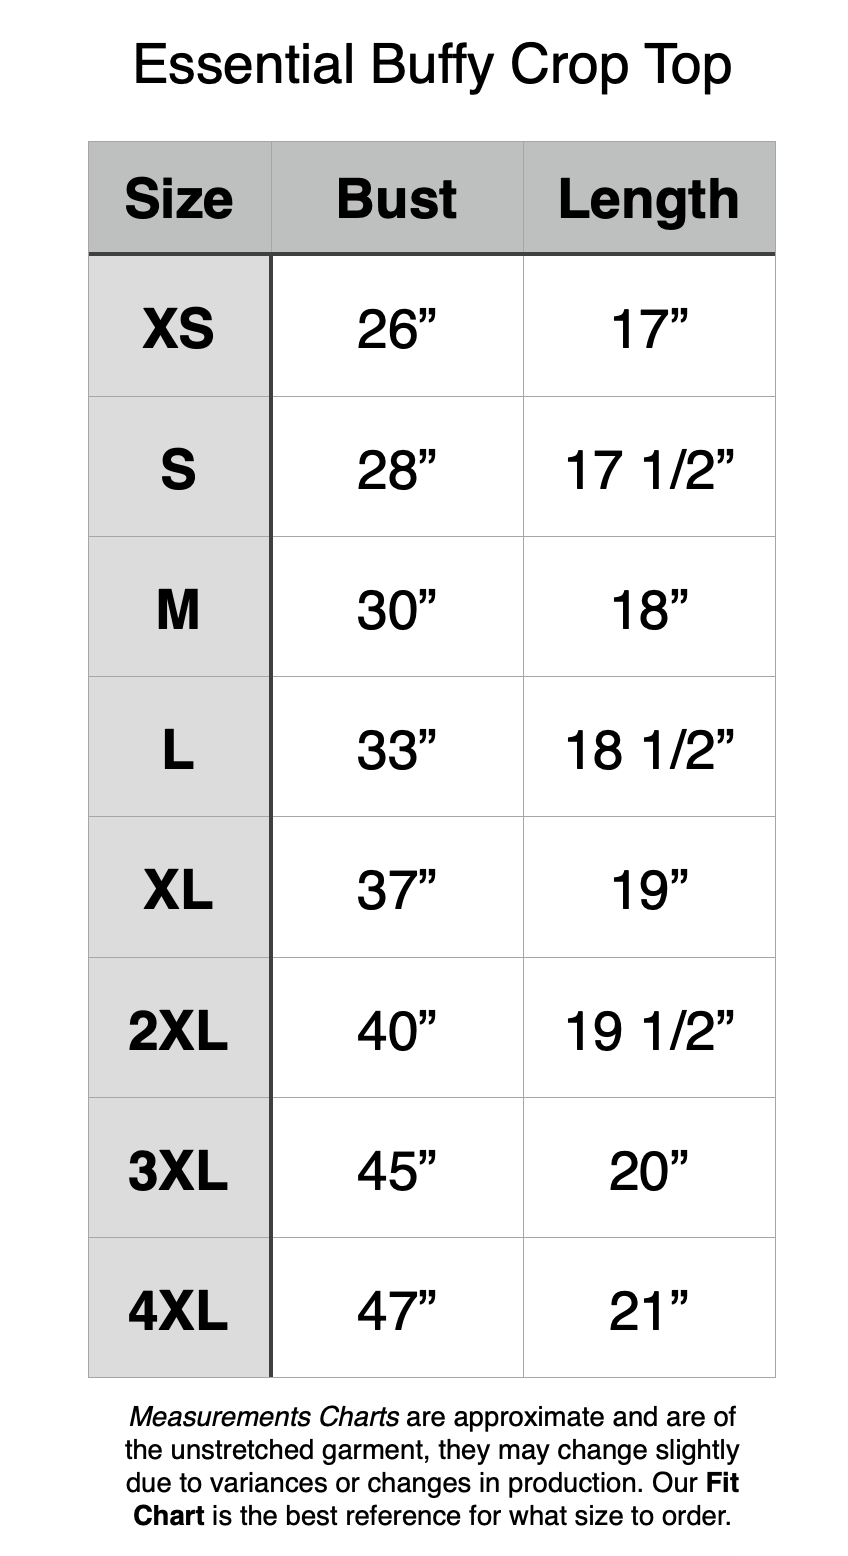 Essential Buffy Crop Top - XS: 26" Bust, 17" Length. S: 28" Bust, 17.5" Length. M: 30" Bust, 18" Length. L: 33" Bust, 18.5" Length. XL: 37" Bust, 19" Length. 2XL: 40" Bust, 19.5" Length. 3XL: 45" Bust, 20" Length. 4XL: 47" Bust, 21" Length.